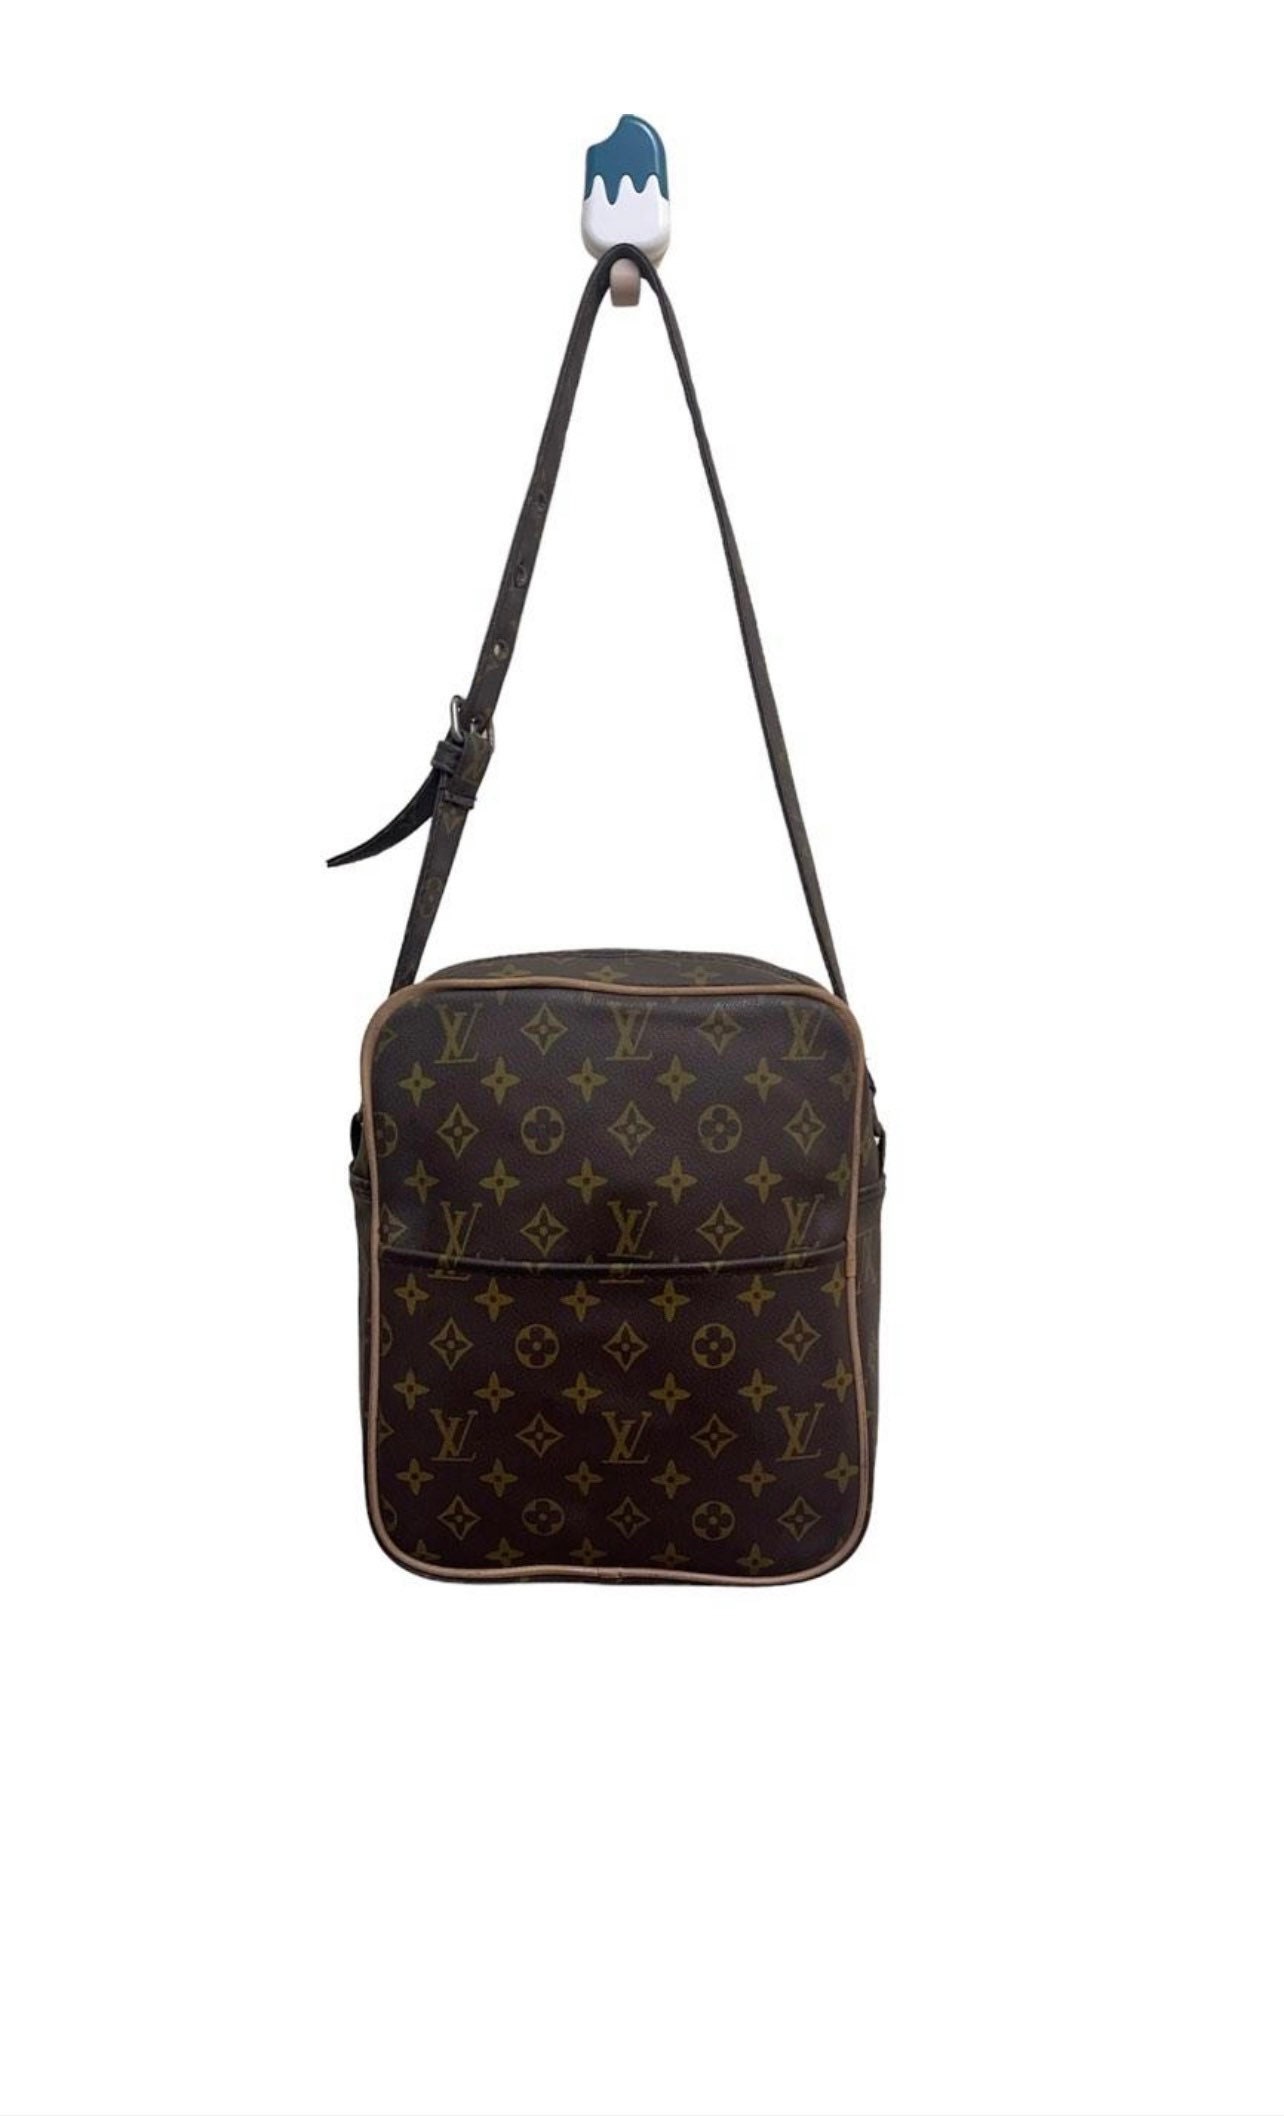 Shoulder and Crossbody Bags Collection for Women  LOUIS VUITTON AUSTRALIA